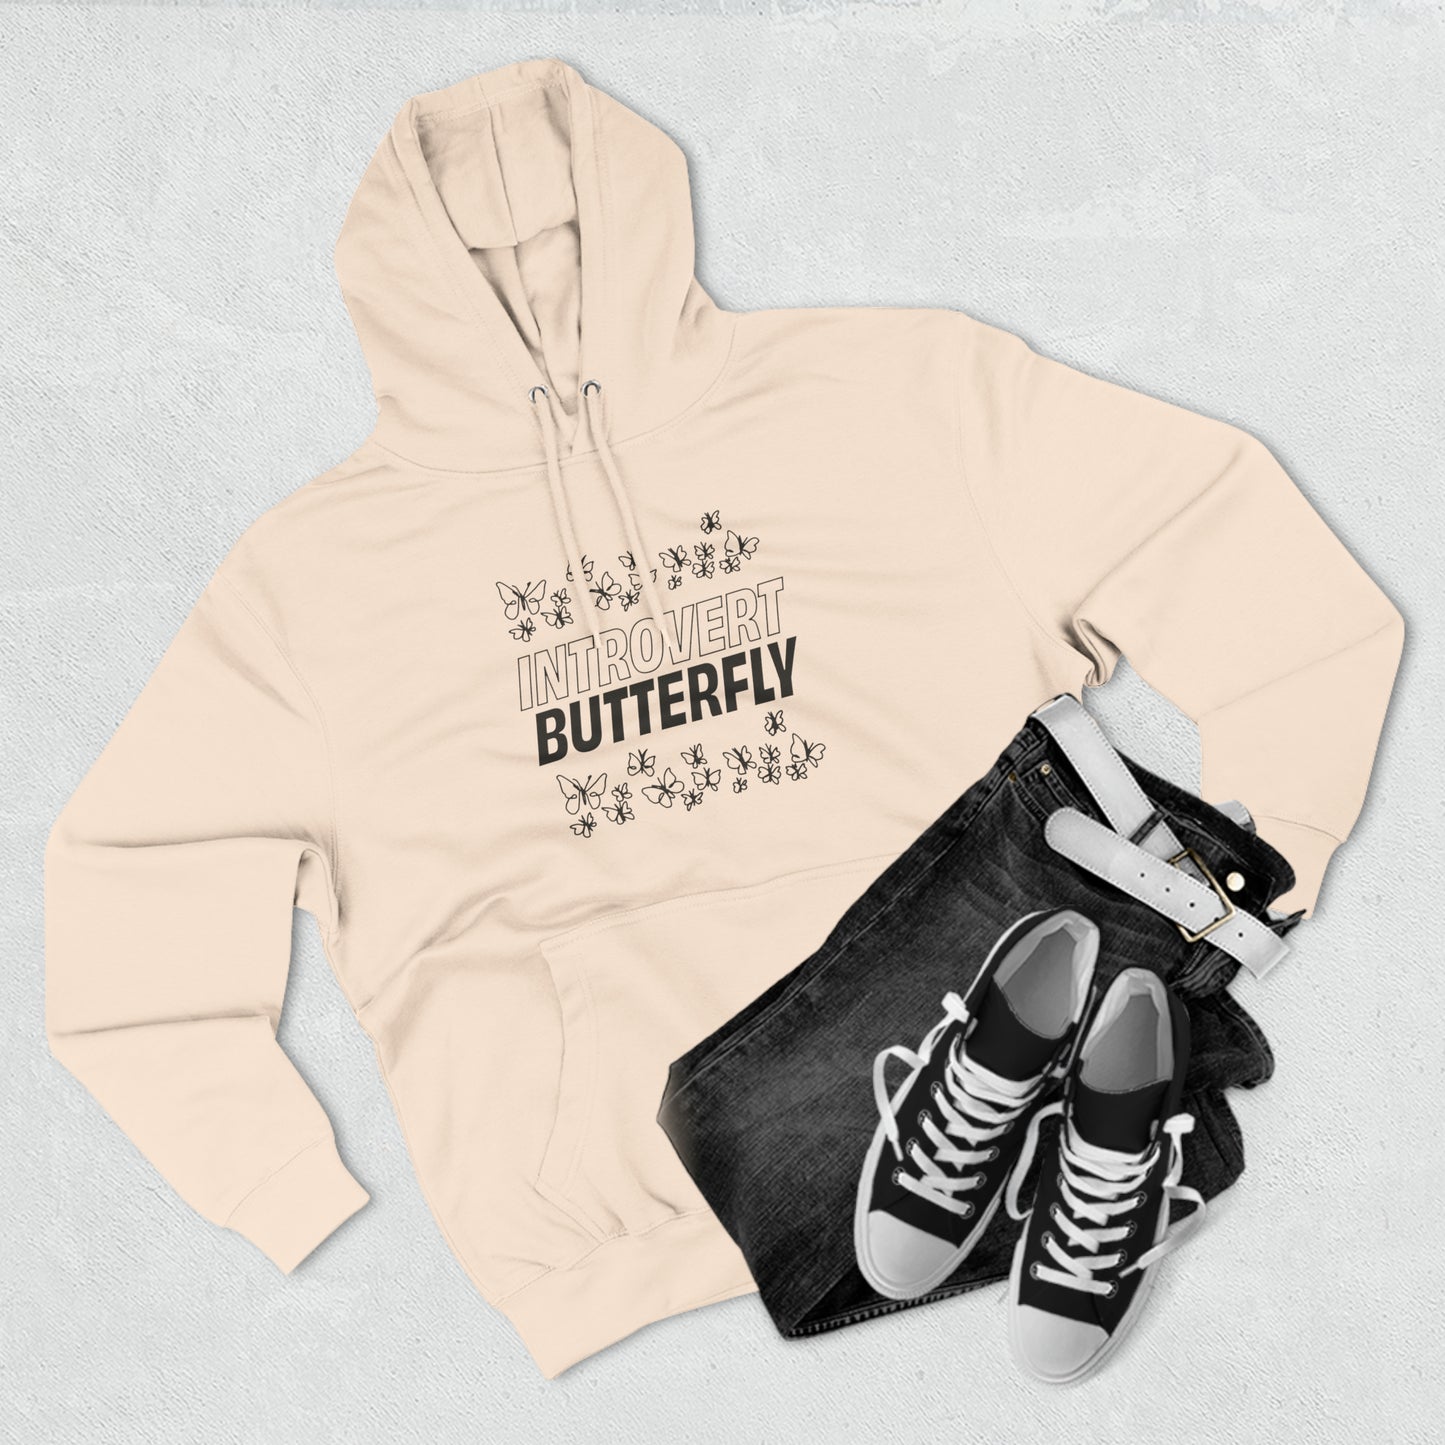 Introvert Butterfly Hoodie